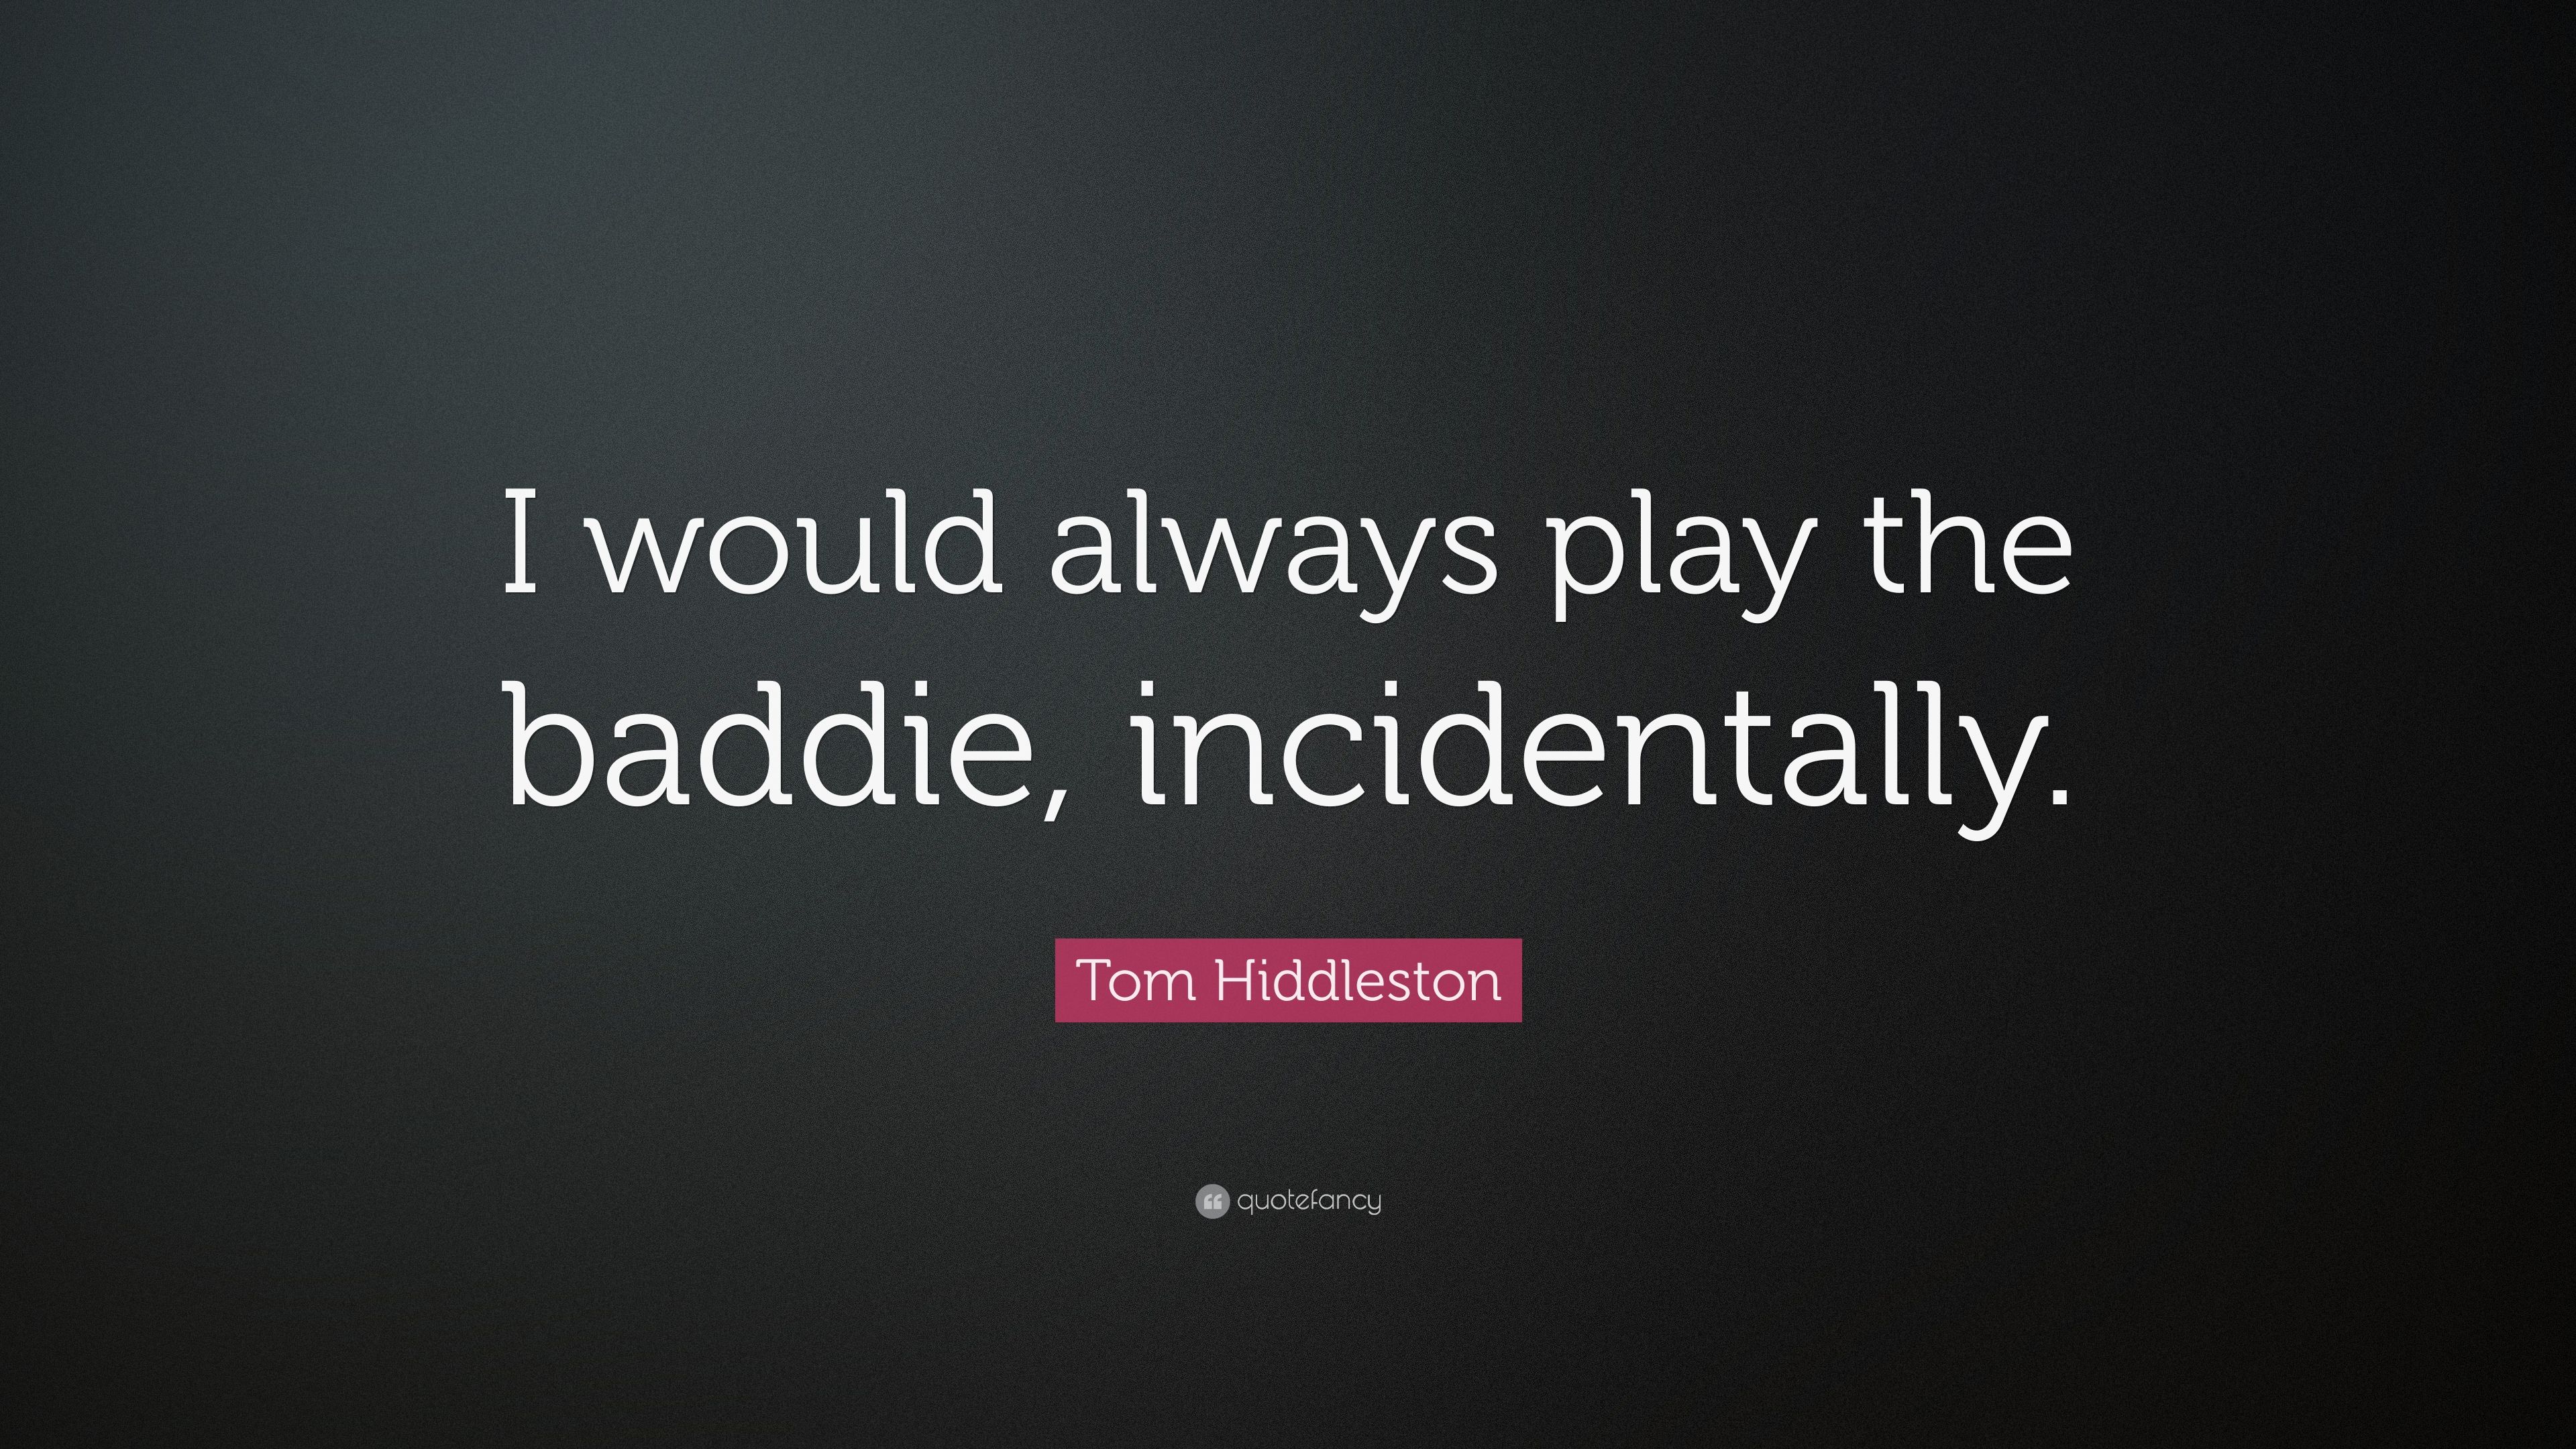 Tom Hiddleston Quote: “I would always play the baddie, incidentally.” (7 wallpaper)